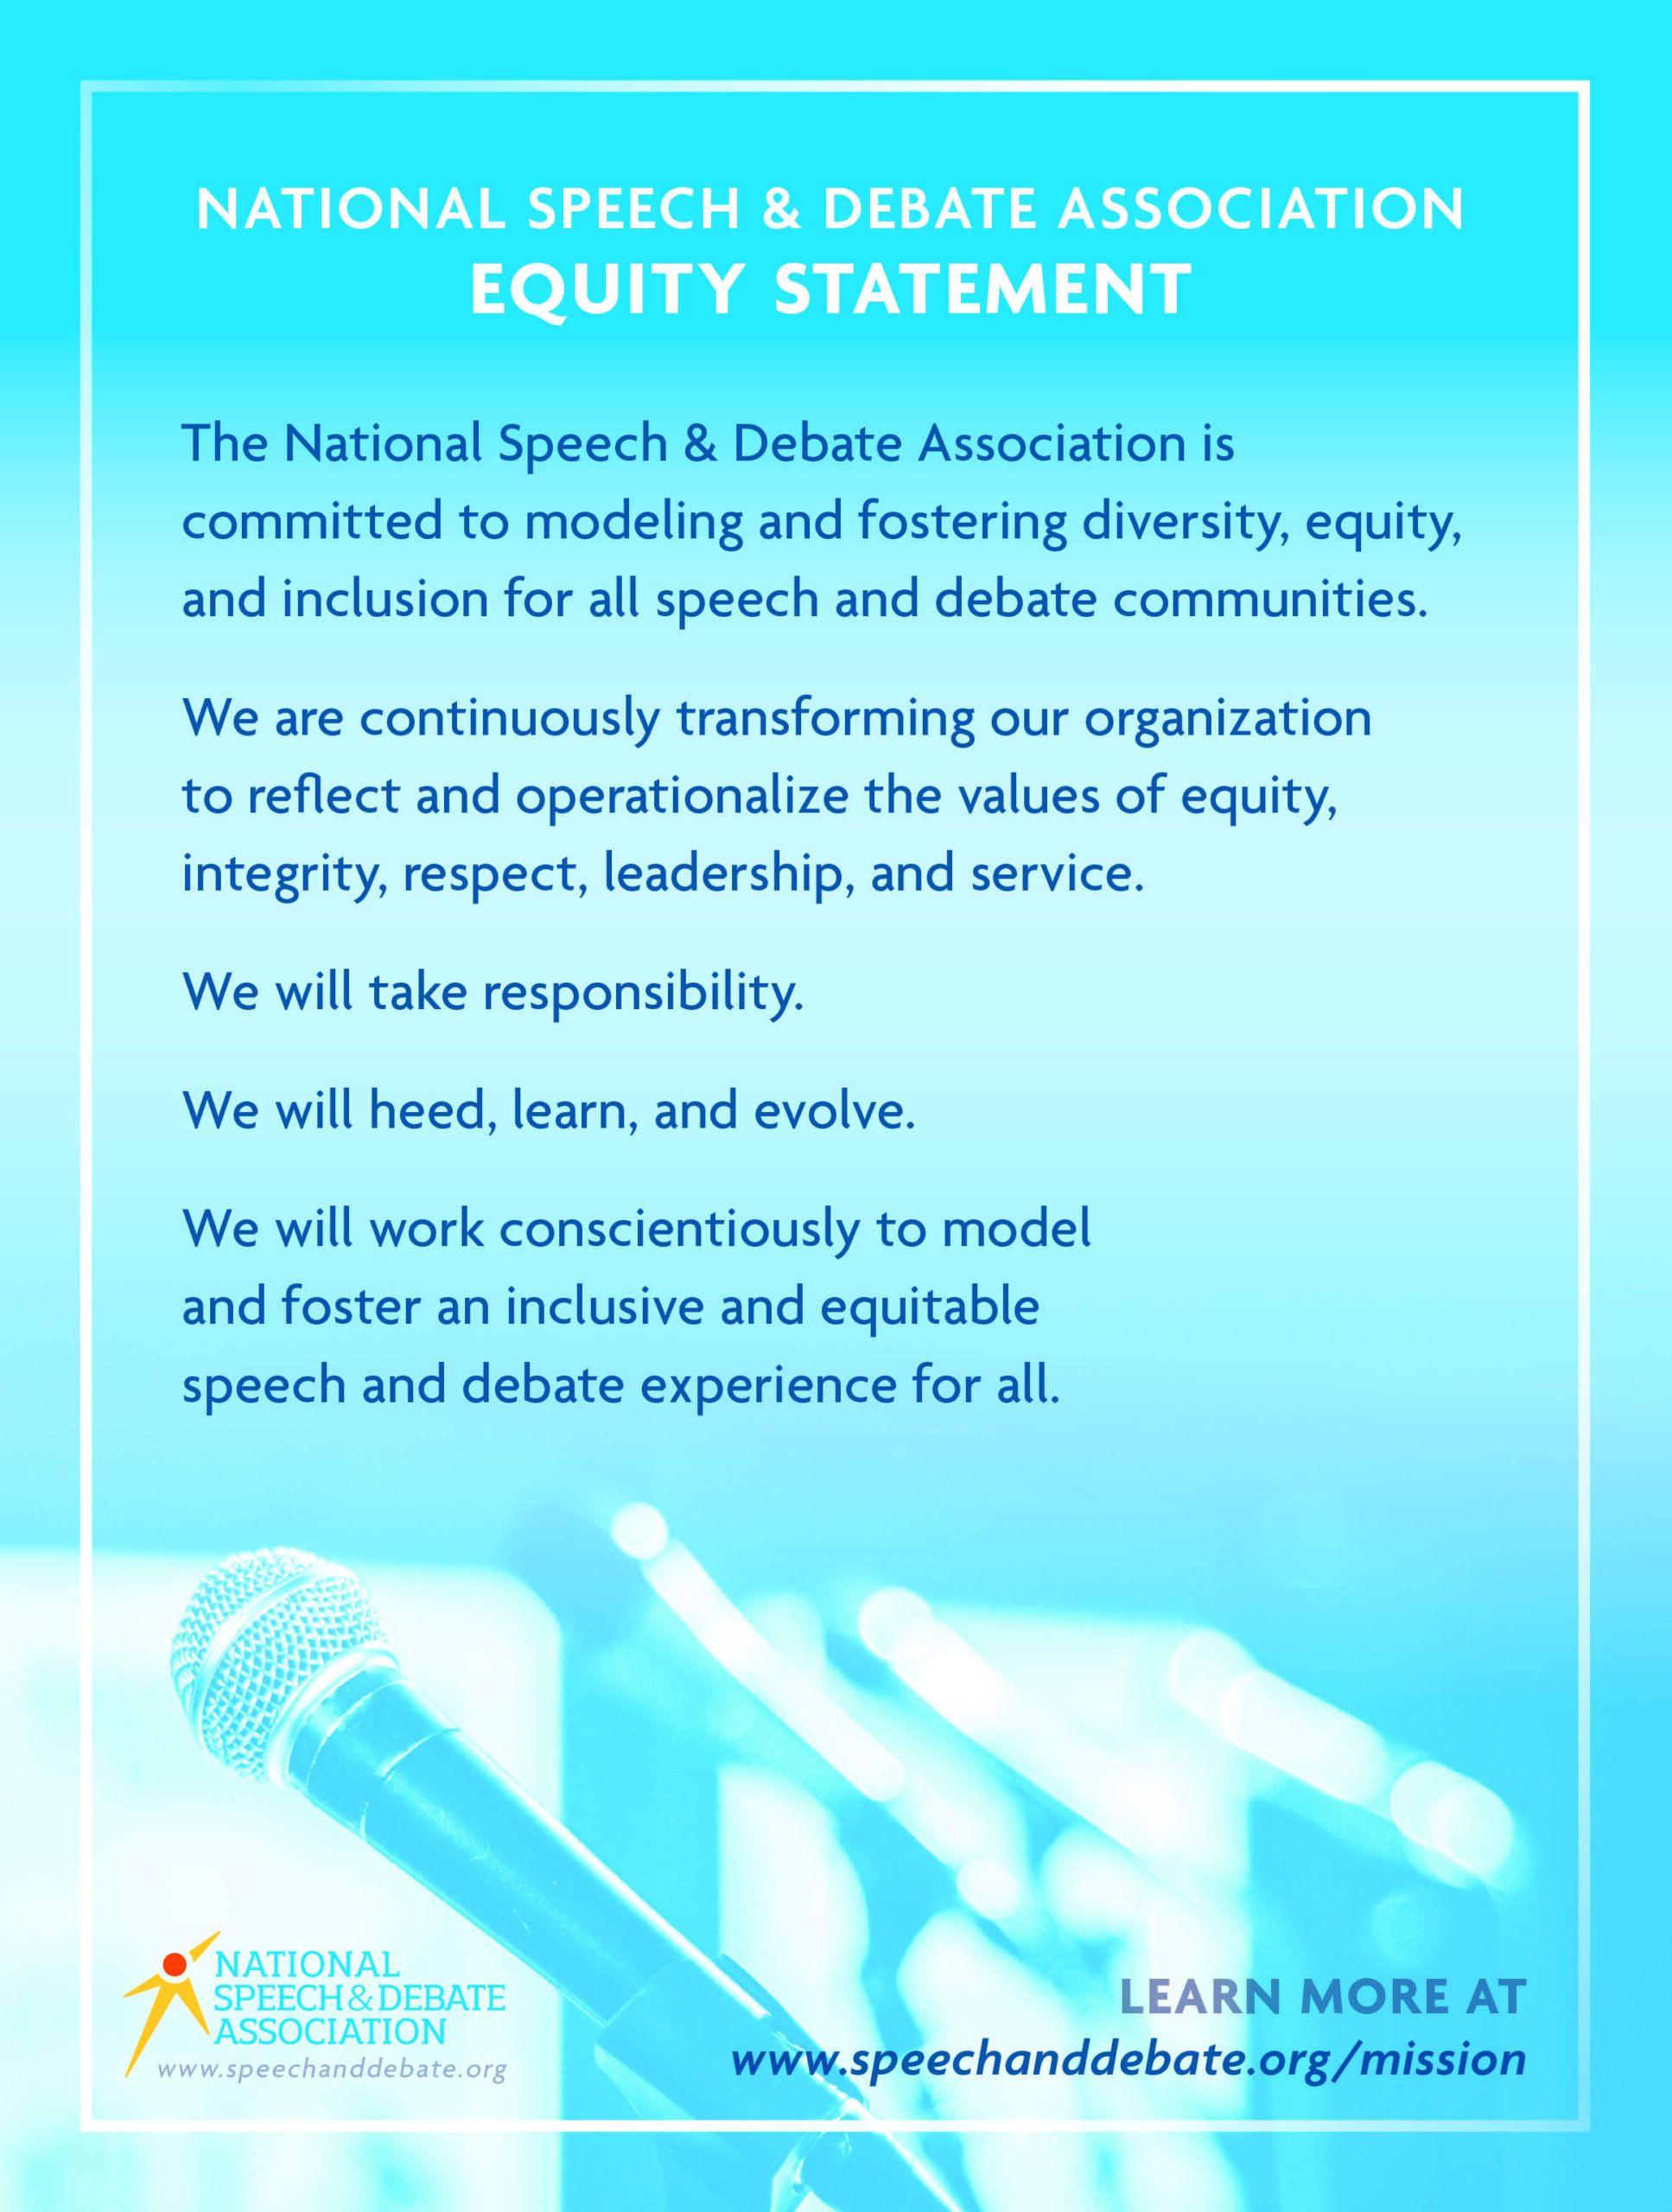 NATIONAL SPEECH & DEBATE ASSOCIATION EQUITY STATEMENT The National Speech & Debate Association is committed to modeling and fostering diversity, equity, and inclusion for all speech and debate communities. We are continuously transforming our organization to reflect and operationalize the values of equity, integrity, respect, leadership, and service. We will take responsibility. We will heed, learn, and evolve. We will work conscientiously to model and foster an inclusive and equitable speech and debate experience for all. 